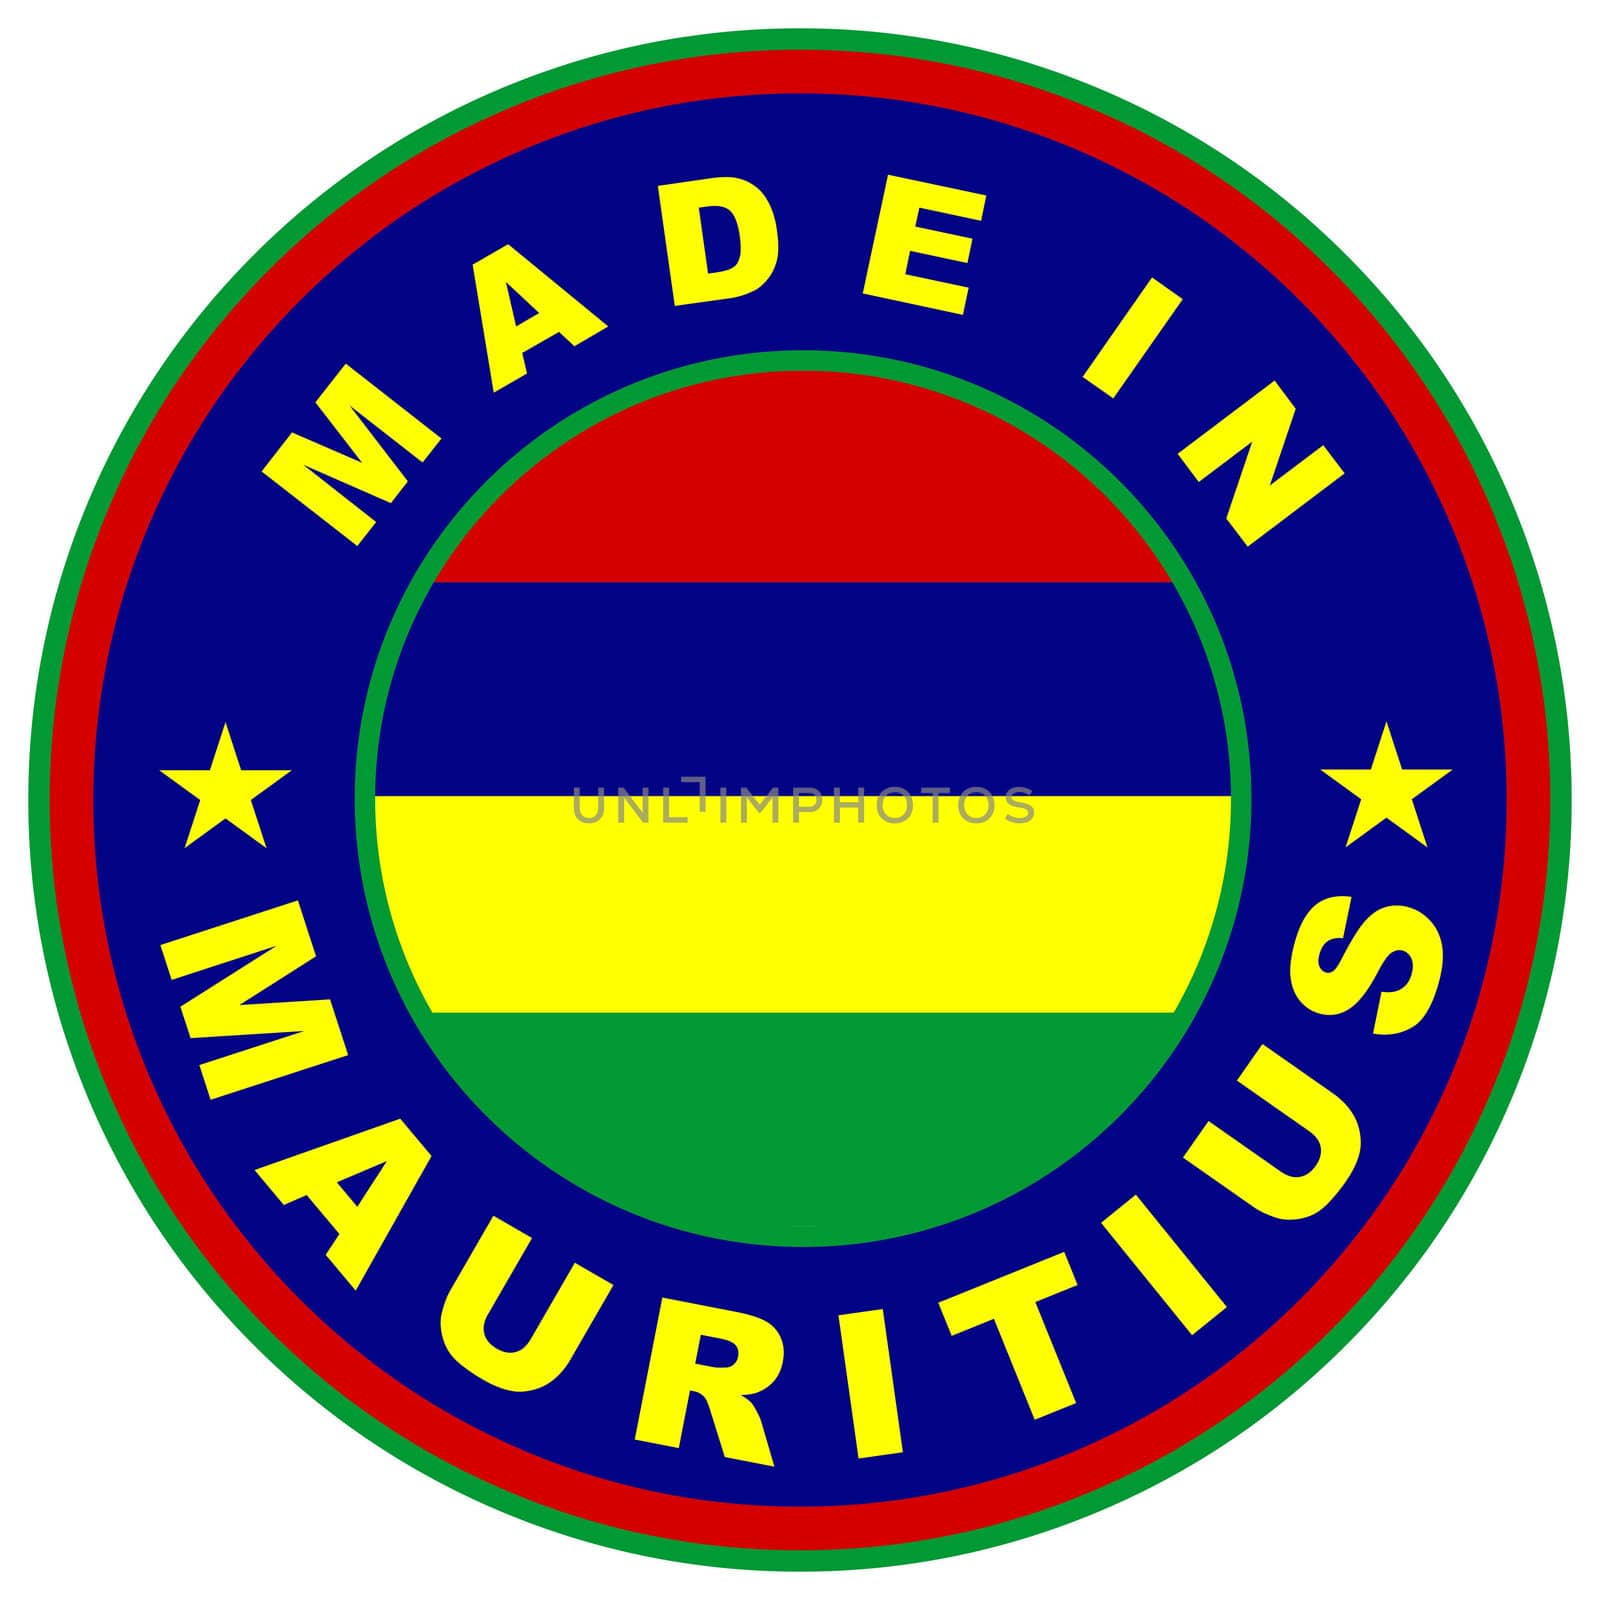 made in mauritius by tony4urban